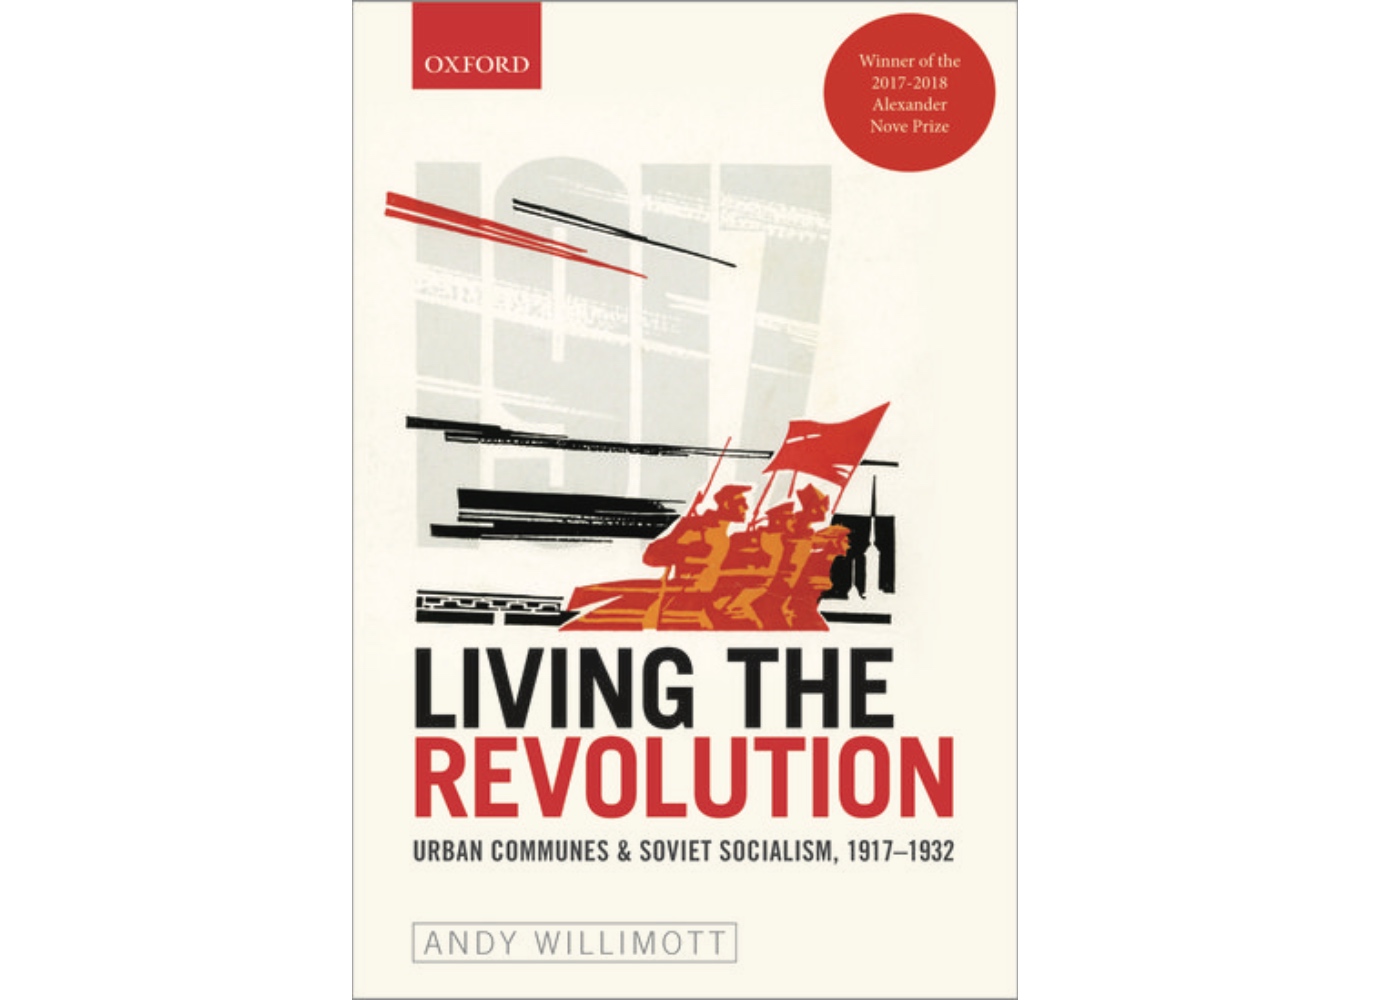 The rise and fall of urban communes during the Russian Revolution | Calvert Reads